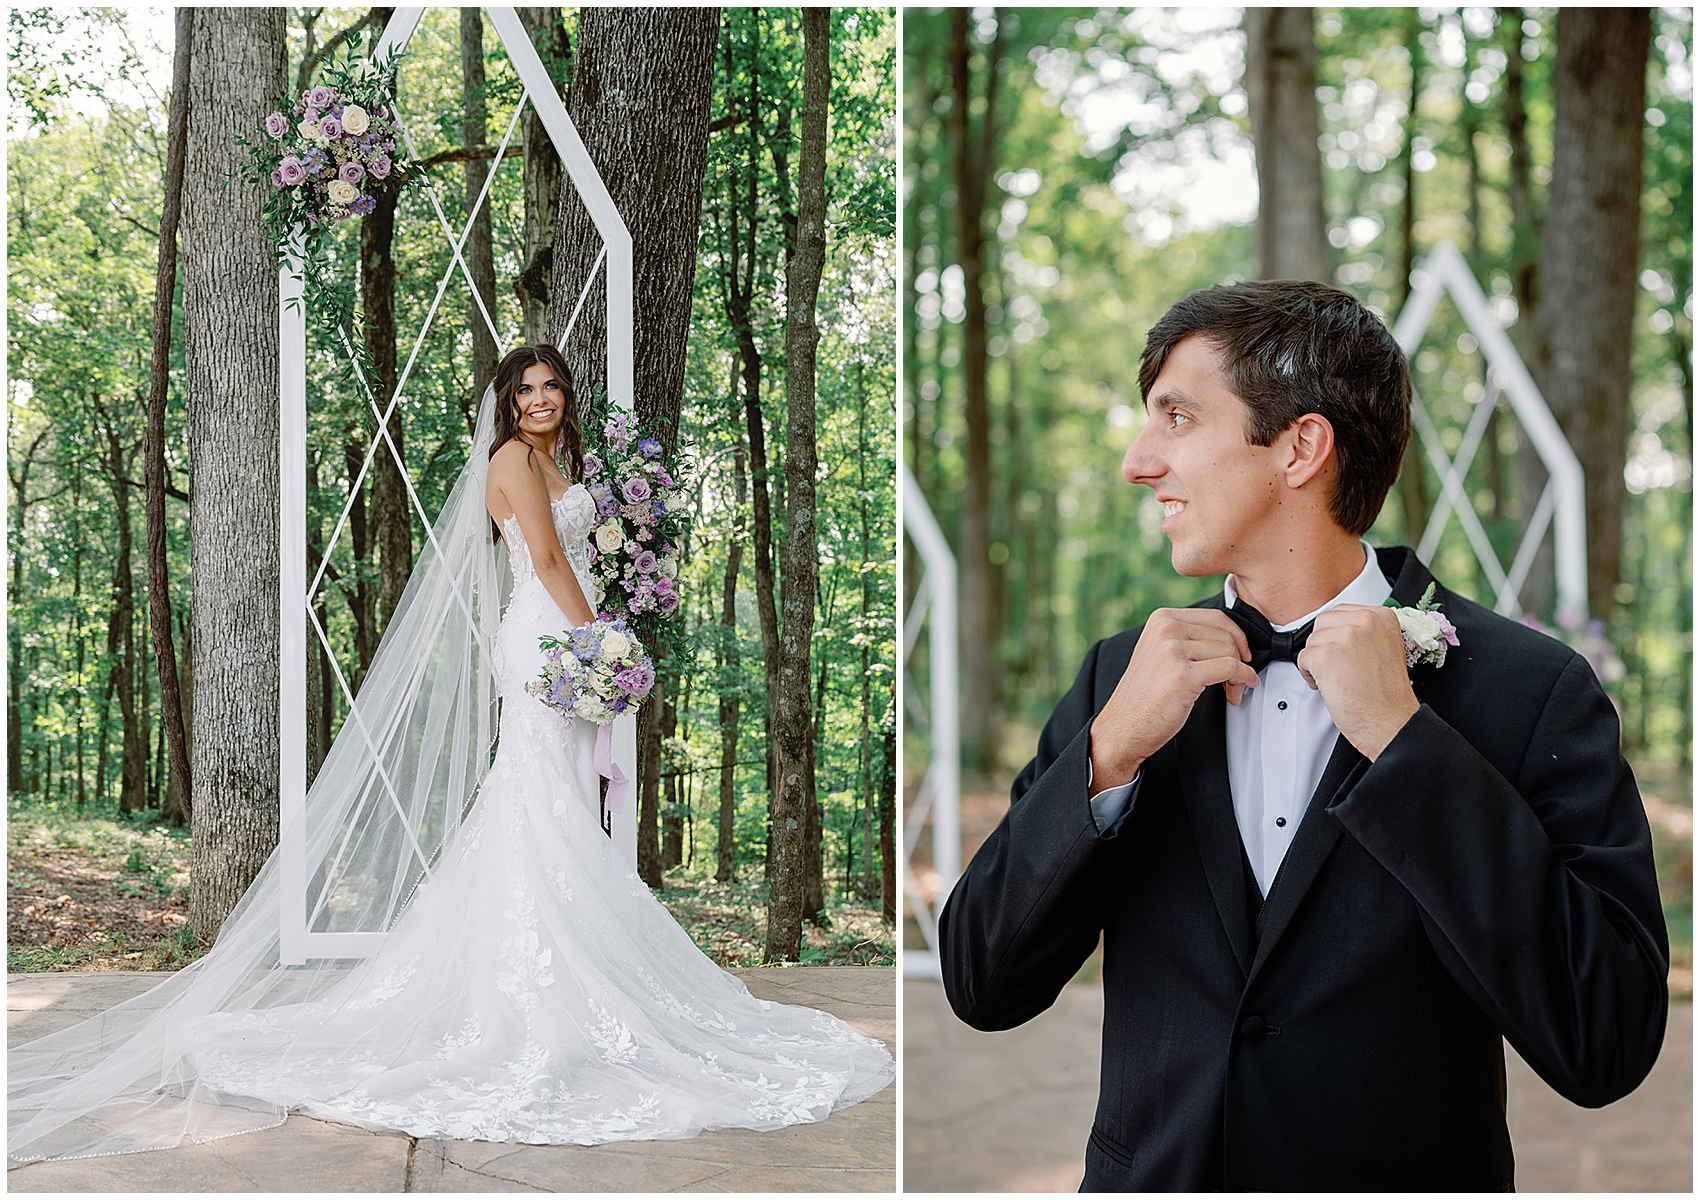 A groom in a black tuxedo adjusts his bowtie while his bride stands holding her bouquet